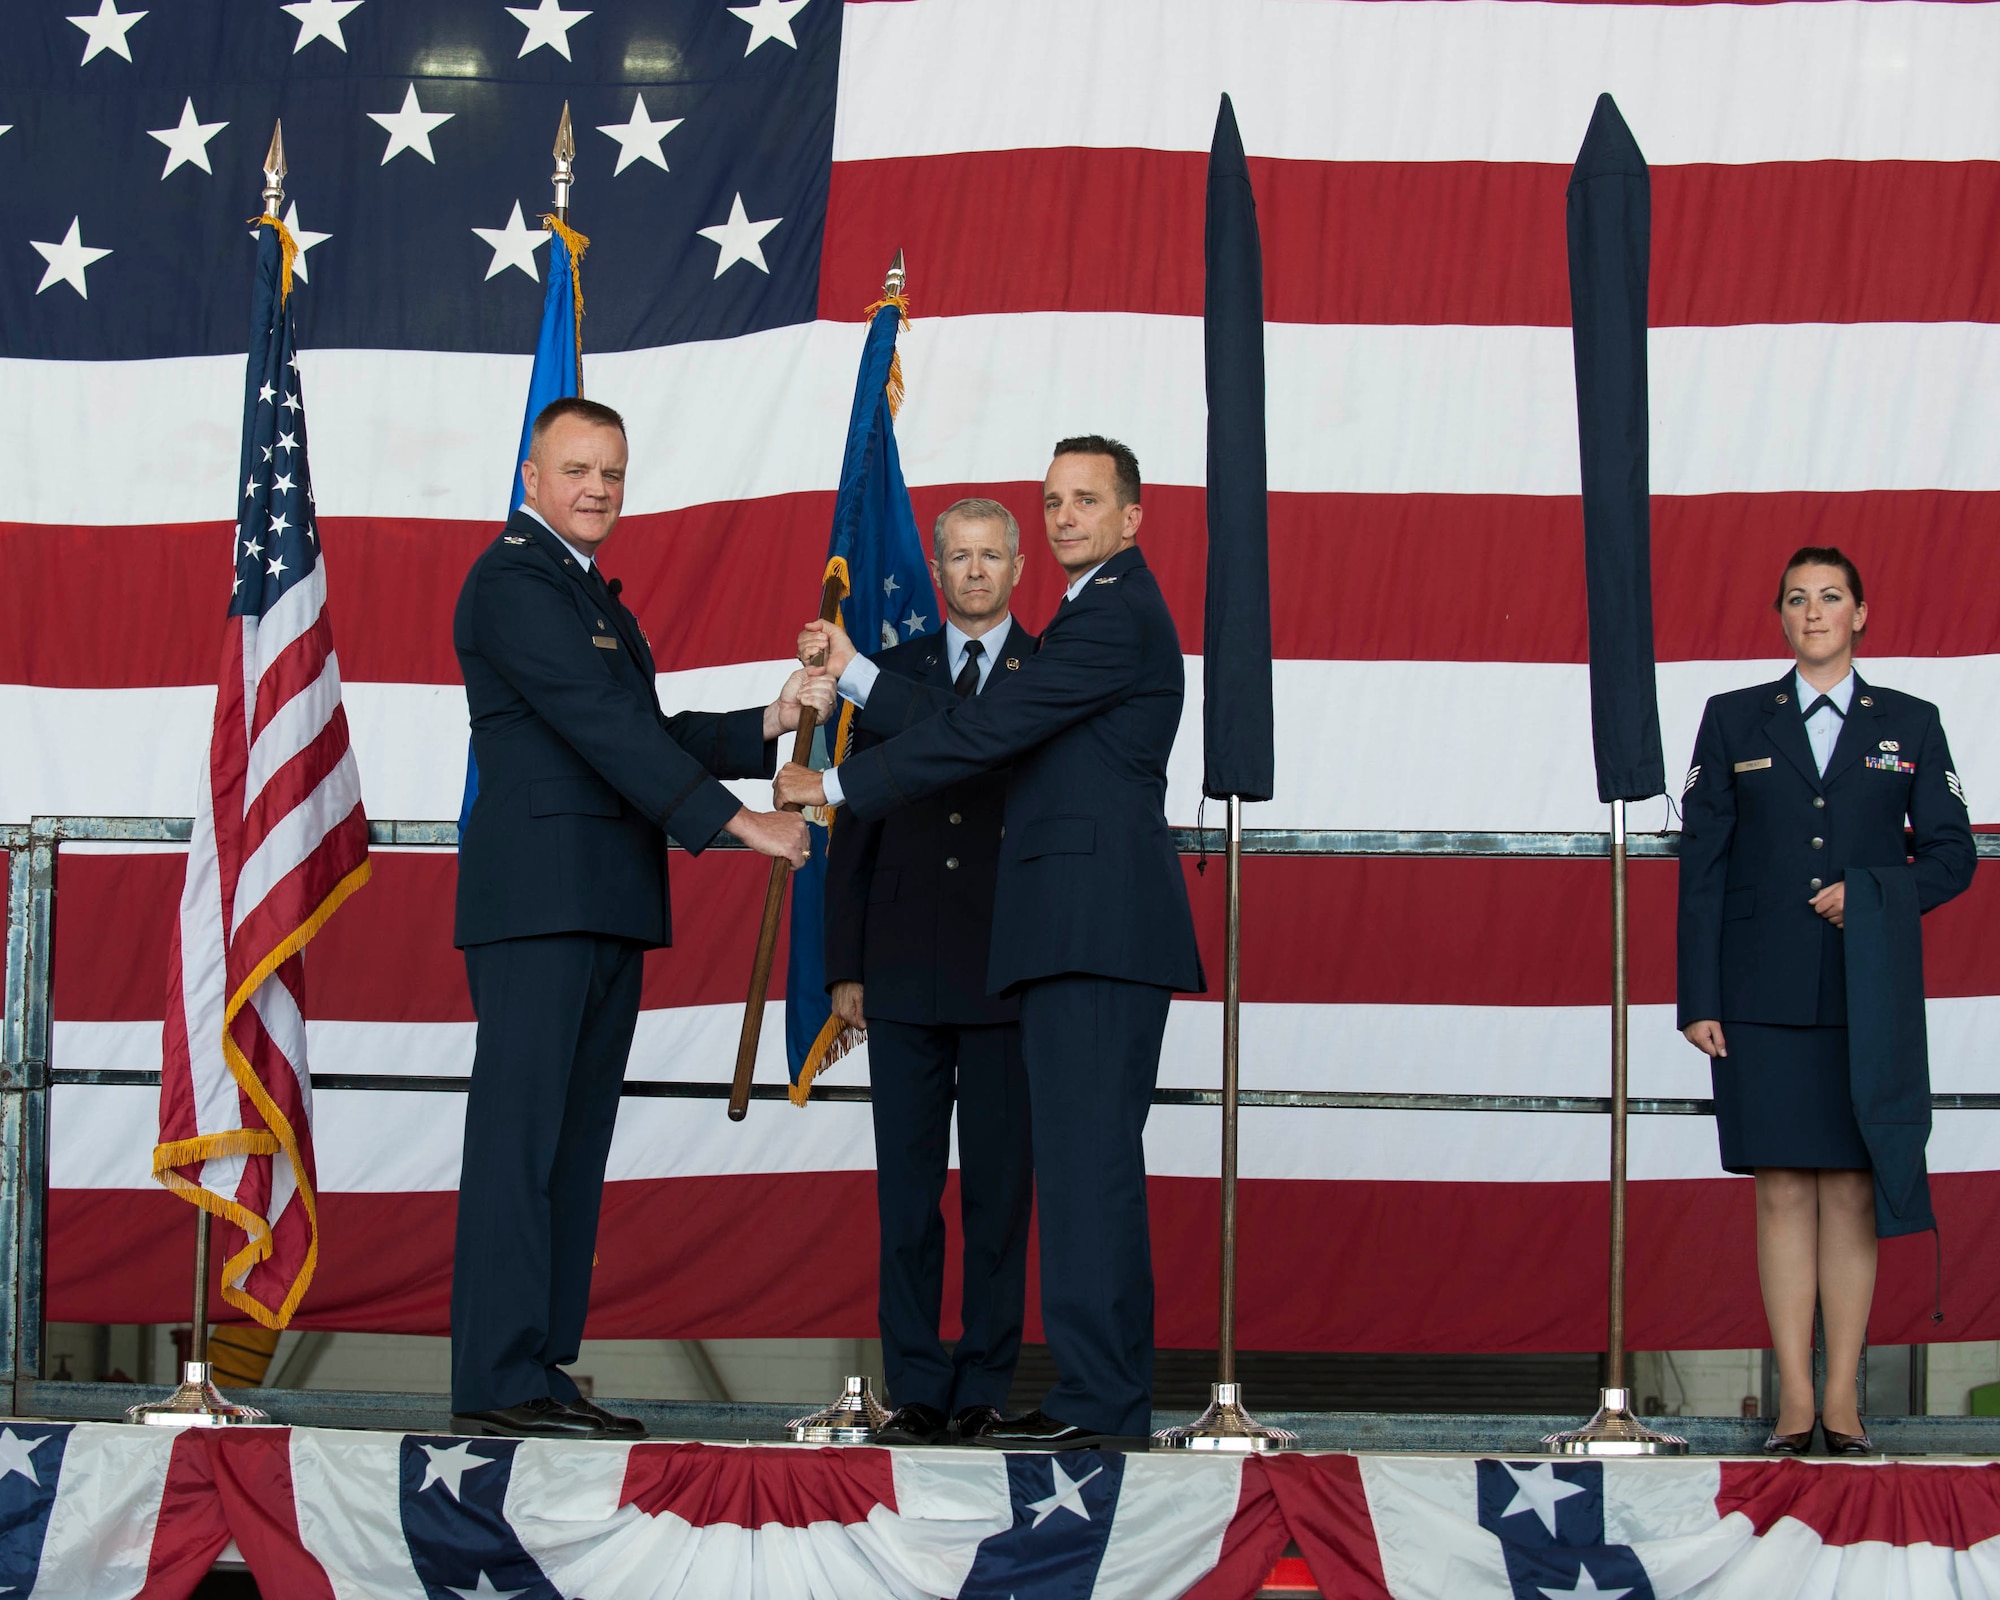 Air Force Col. Bruce Cox, 307th Bomb Wing commander, left, passes a guidon to Col. Denis Heinz, 489th Bomb Group commander, during the 489th BG Reactivation ceremony Oct. 17, 2015, at Dyess Air Force Base, Texas. The unit will be furthering Total Force Integration, which aims to integrate active duty Air Force, Air Force Reserve and Air National Guard components, by using the B-1B Lancers at Dyess for their mission and the 7th Bomb Wing’s mission . (U.S. Air Force photo by Airman Quay Drawdy)